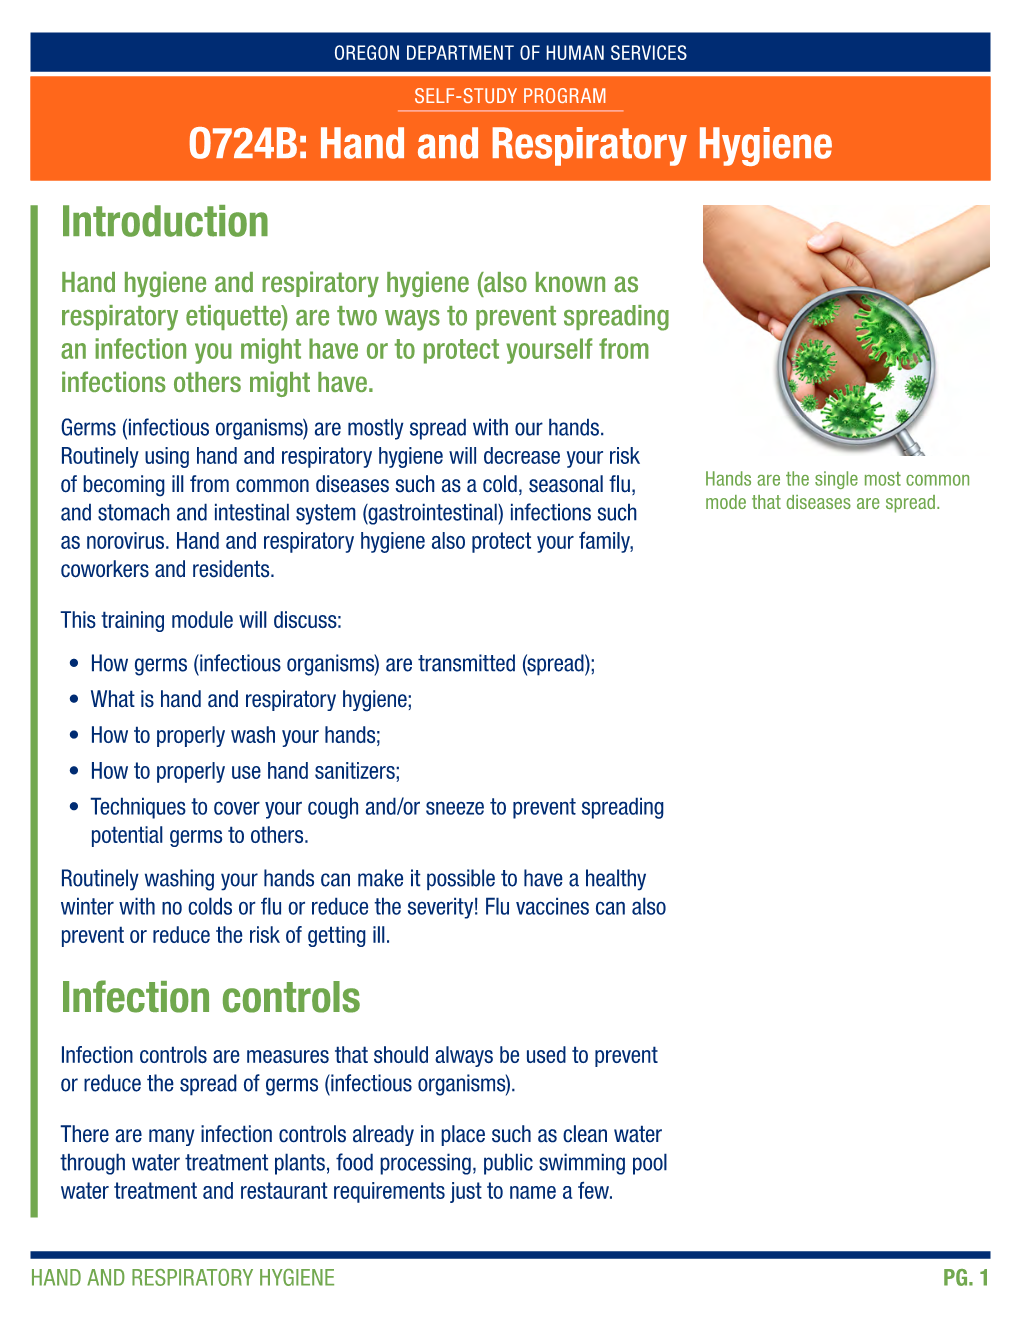 Hand and Respiratory Hygiene Introduction Infection Controls